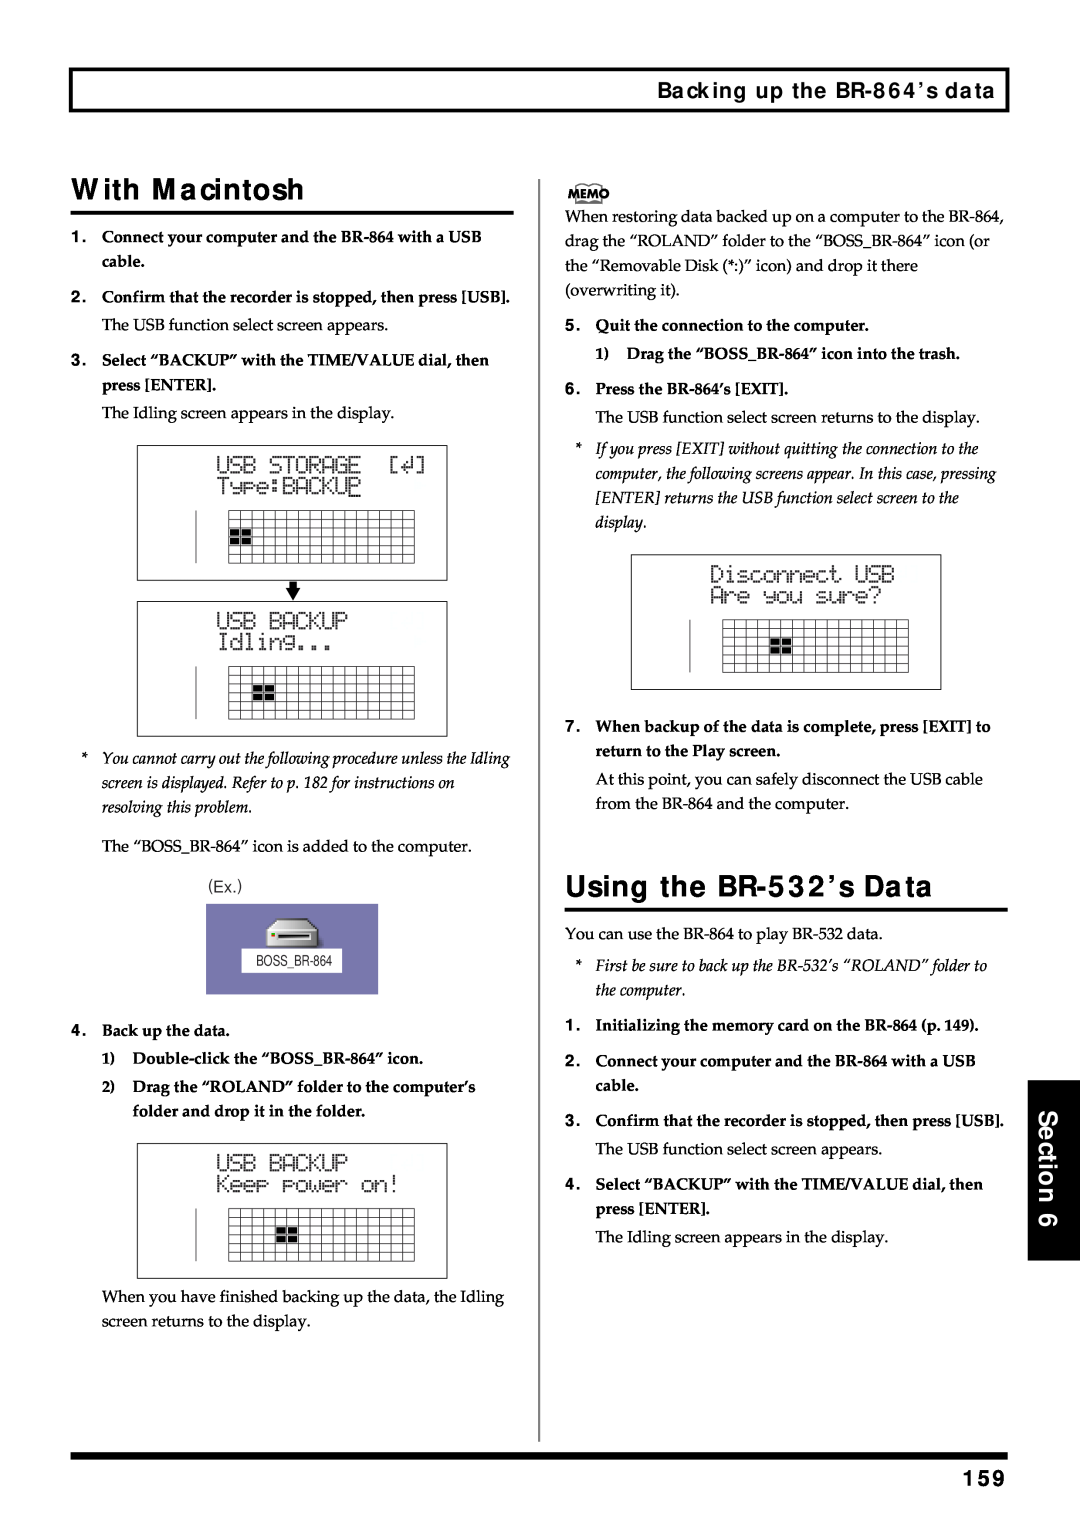 Roland owner manual With Macintosh, Using the BR-532’sData, Backing up the BR-864’sdata 